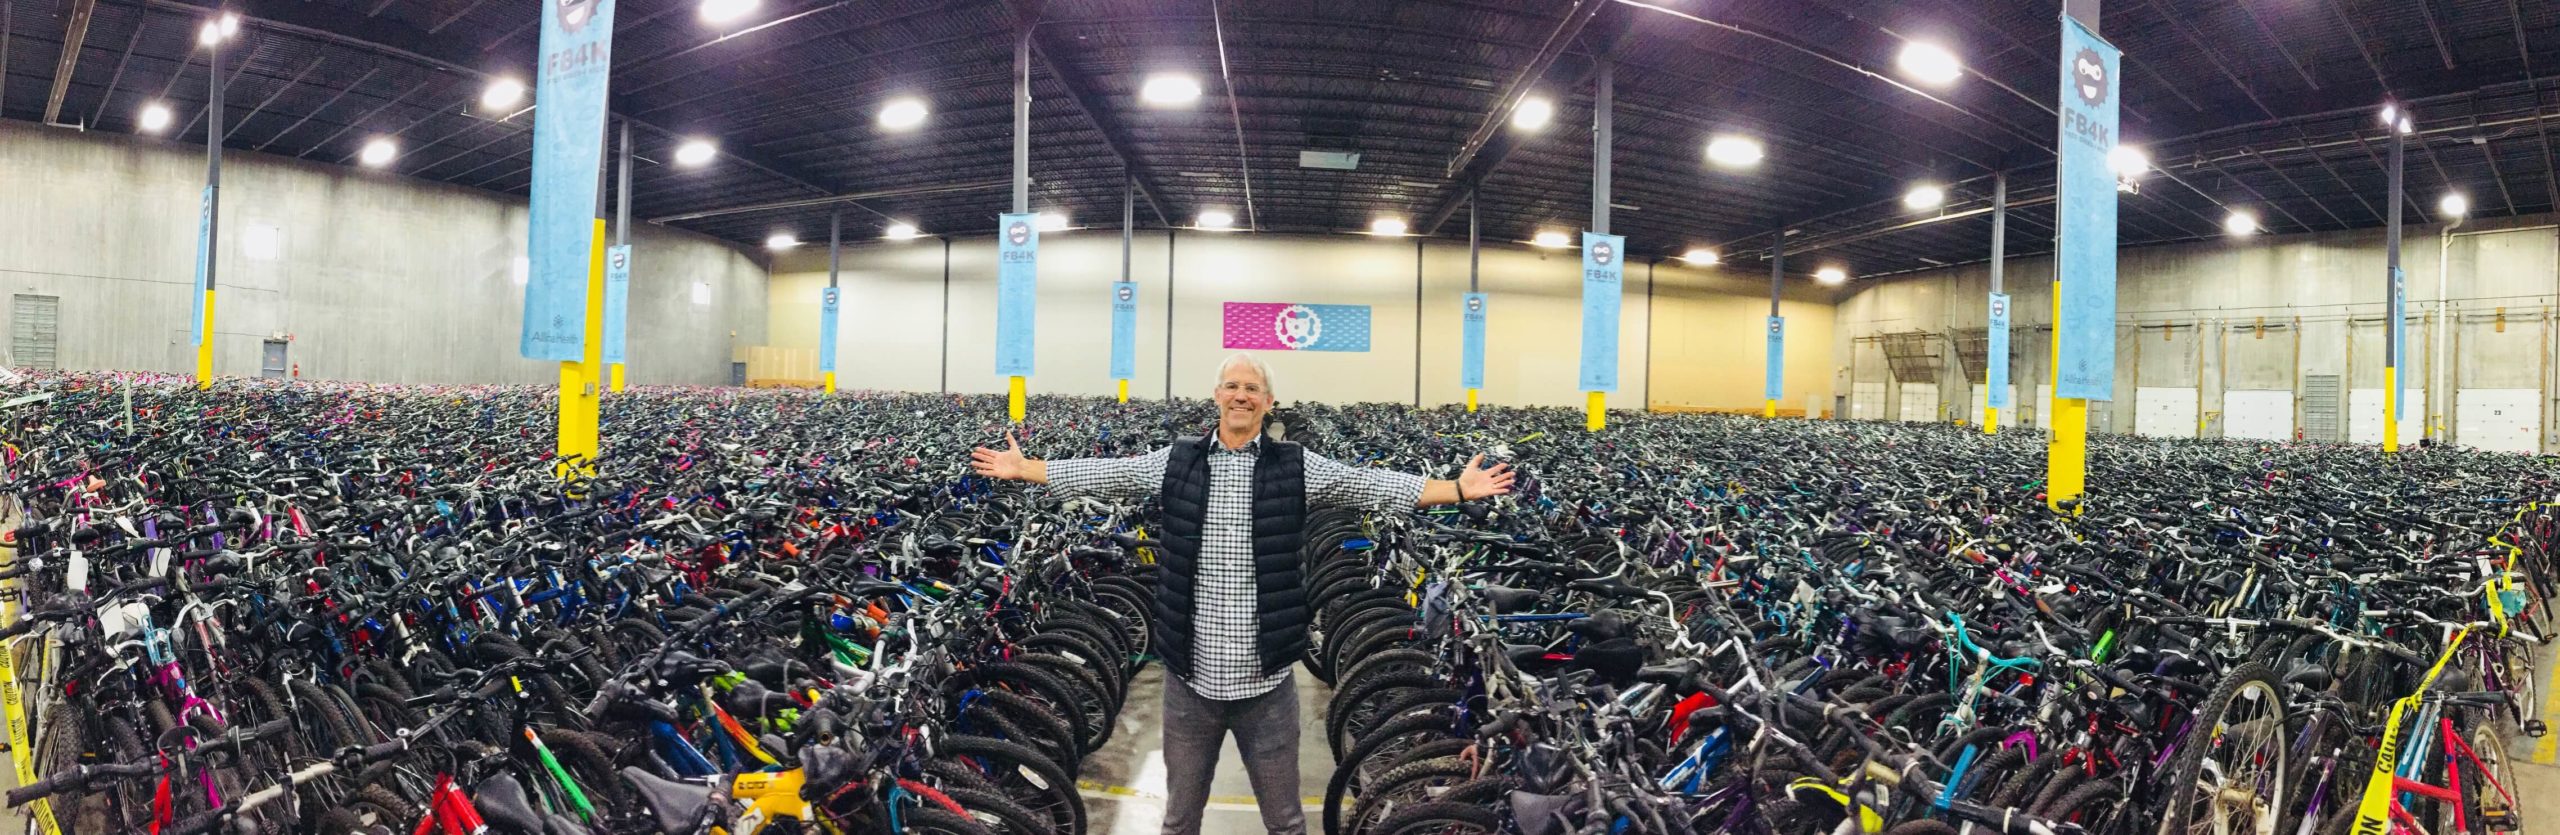 Terry with 10k Bikes